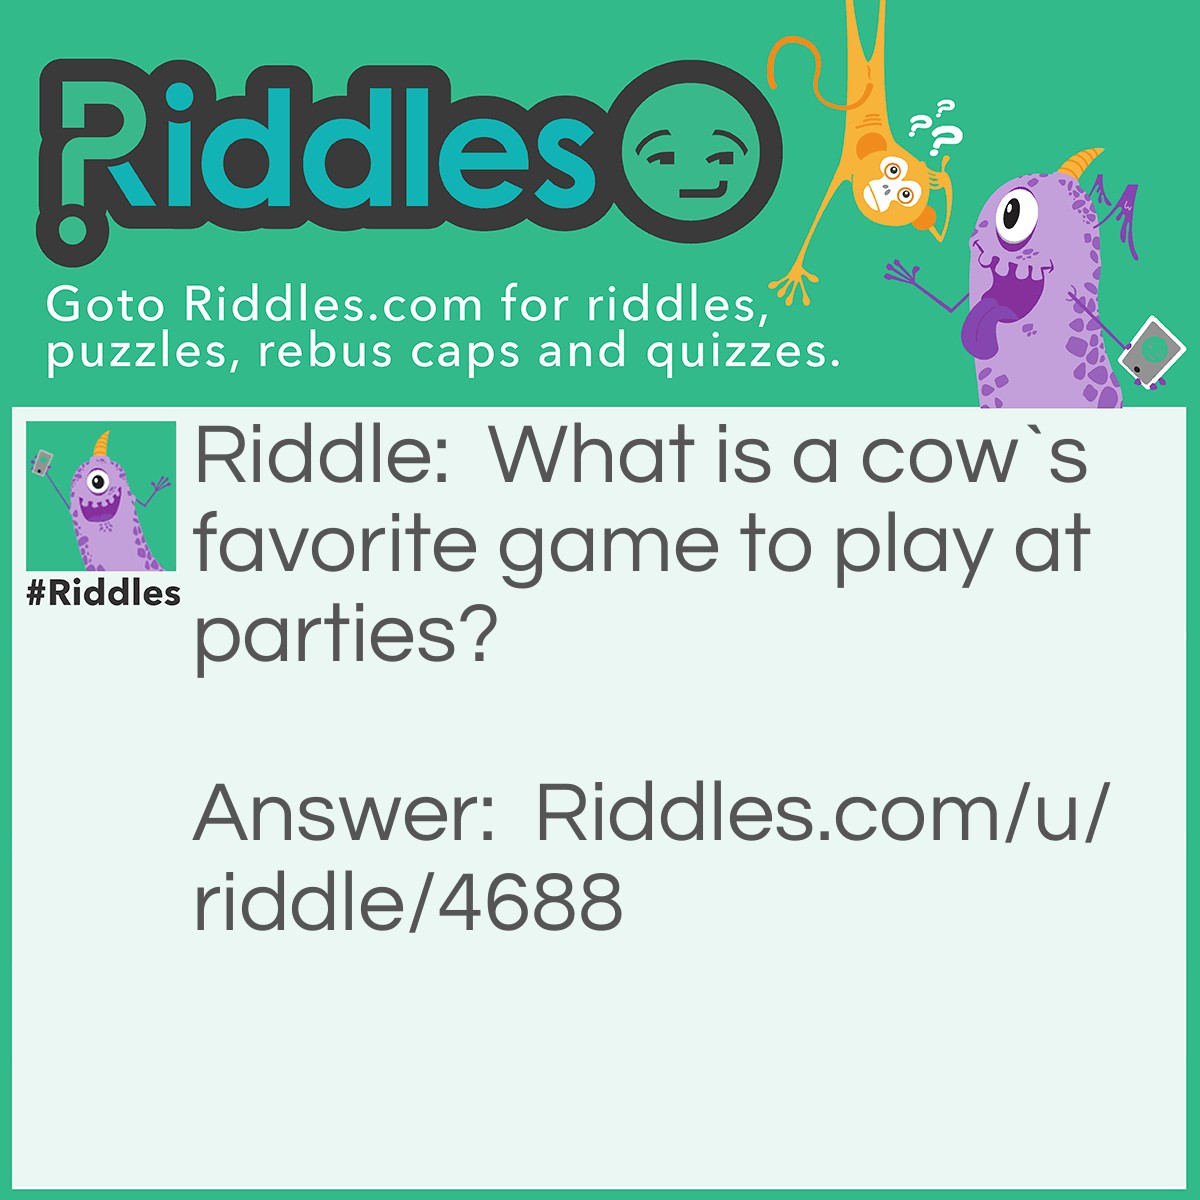 Riddle: What is a cow`s favorite game to play at parties? Answer: Moo-sical chairs.